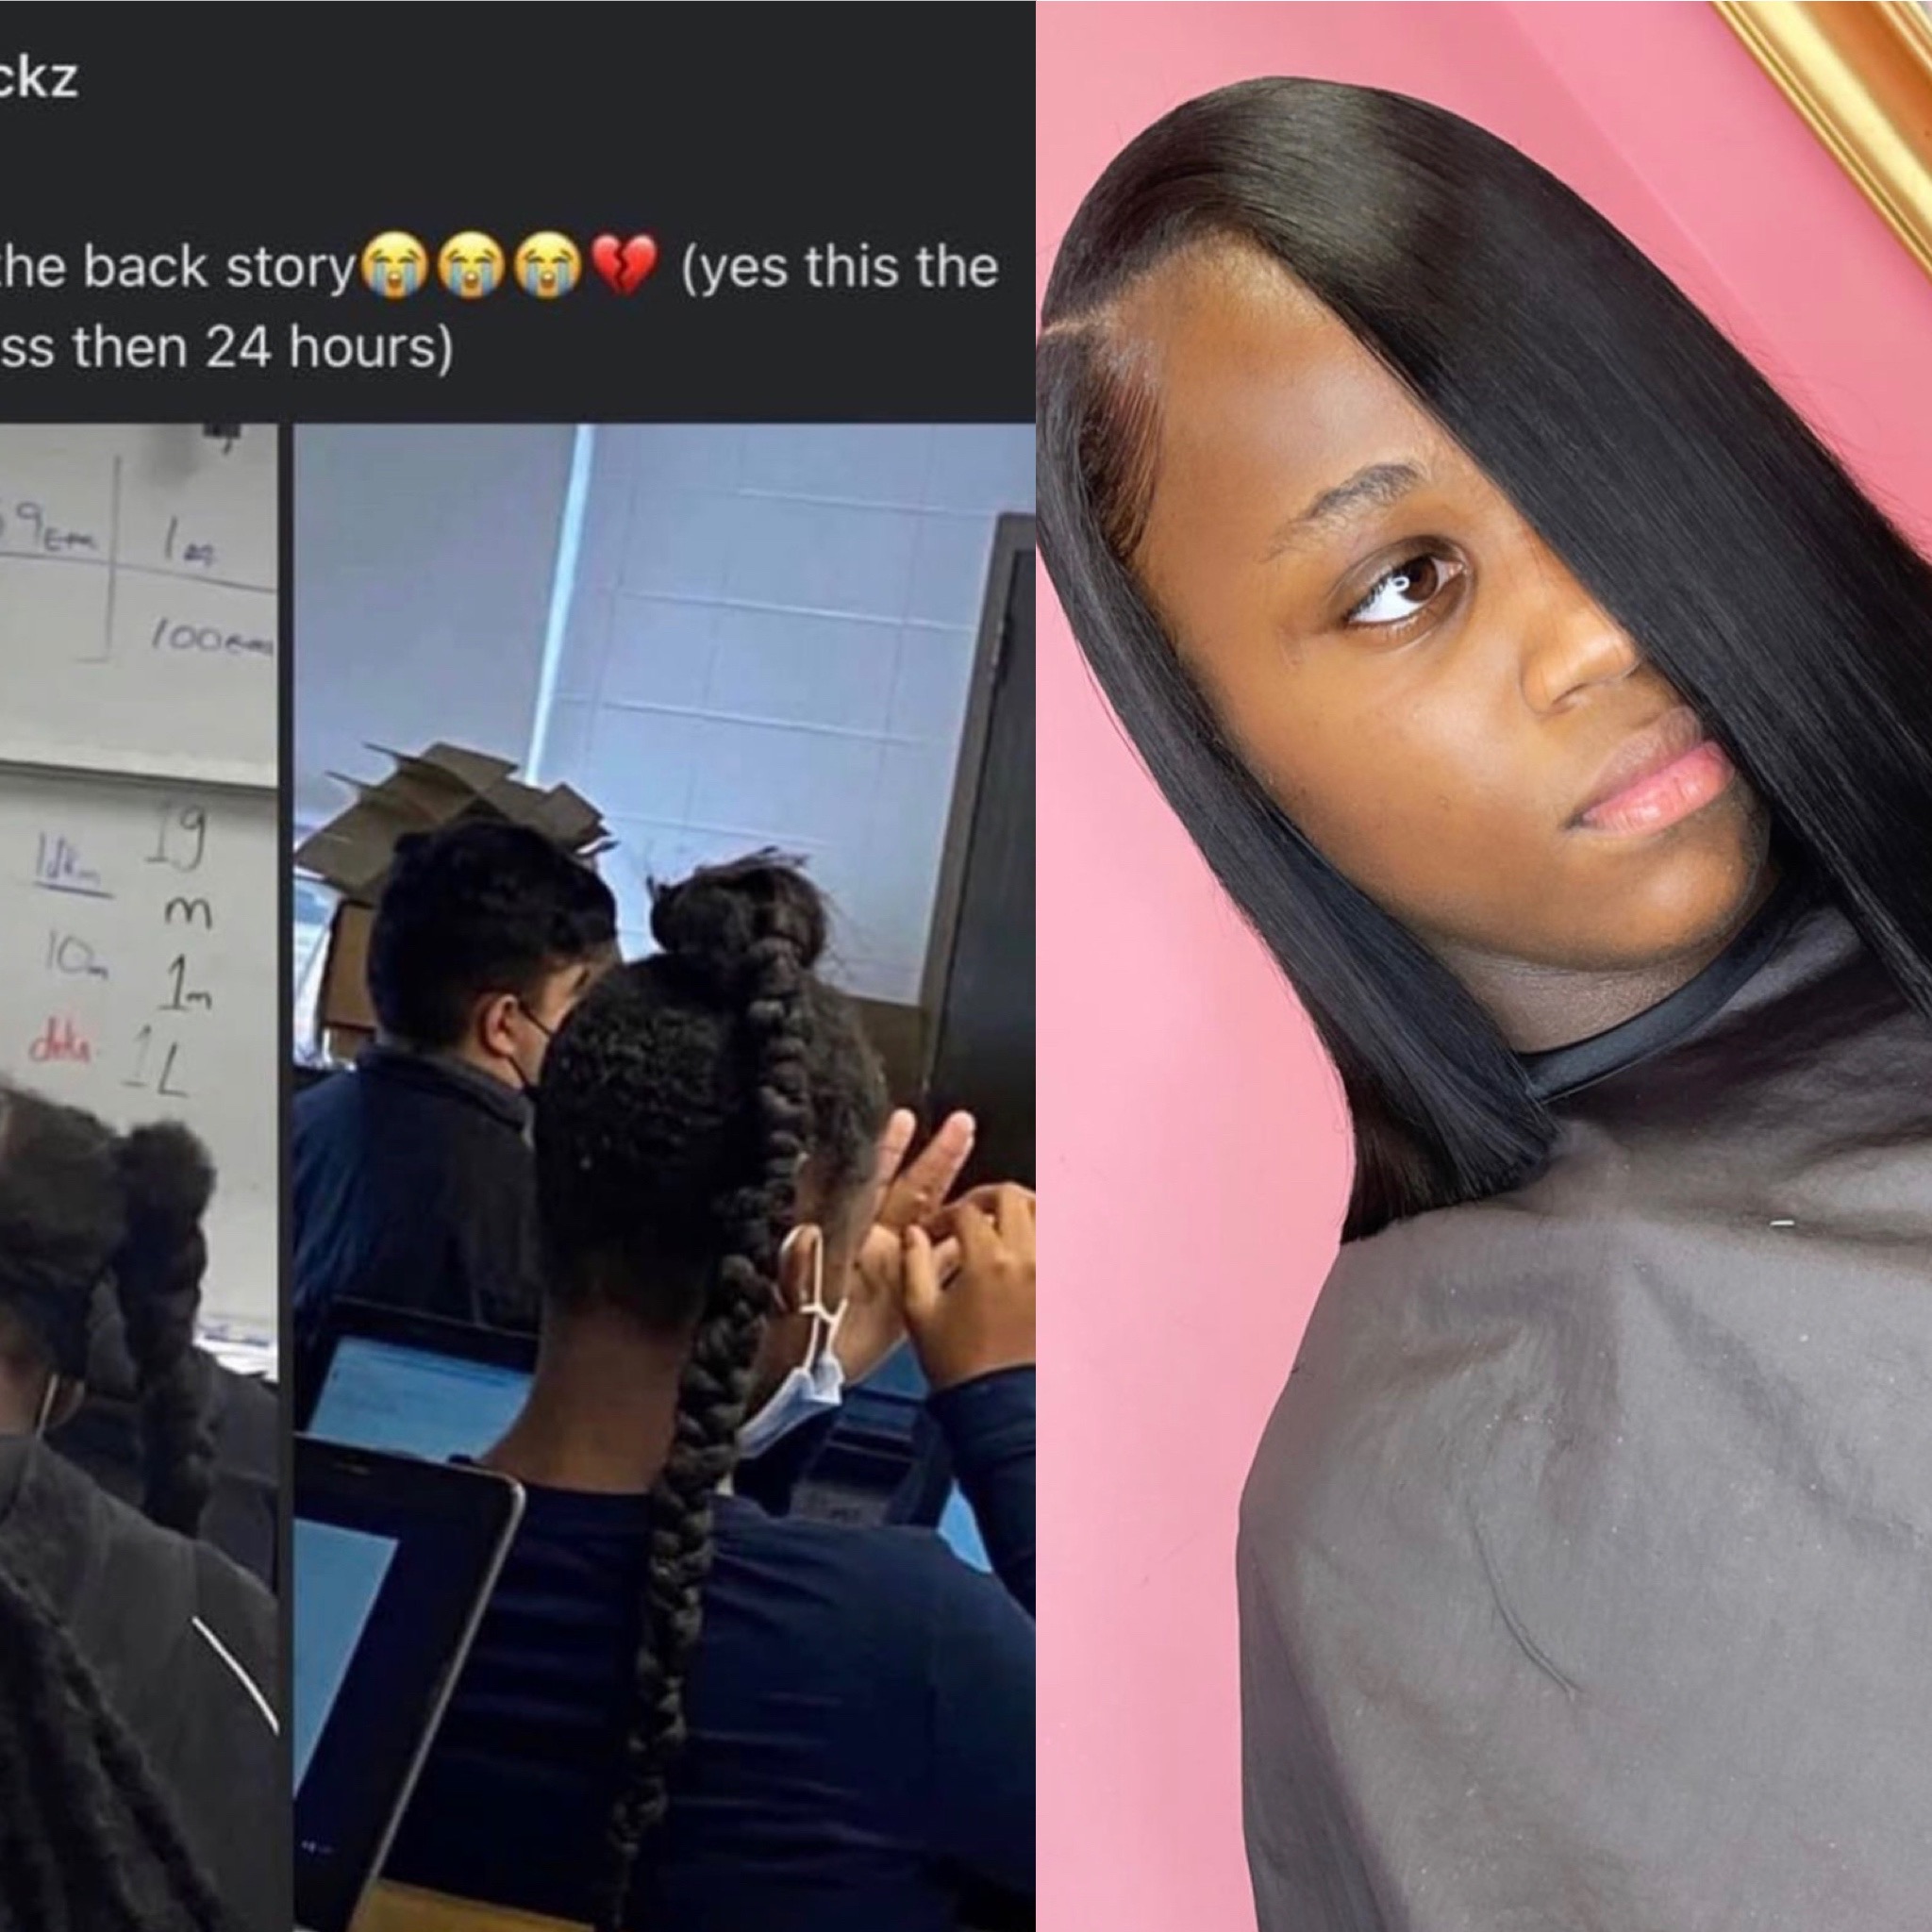 A Chicago Stylist Gave A Student A Free Hair Makeover After A Classmate  Attempted To Embarrass Her Online - Emily CottonTop